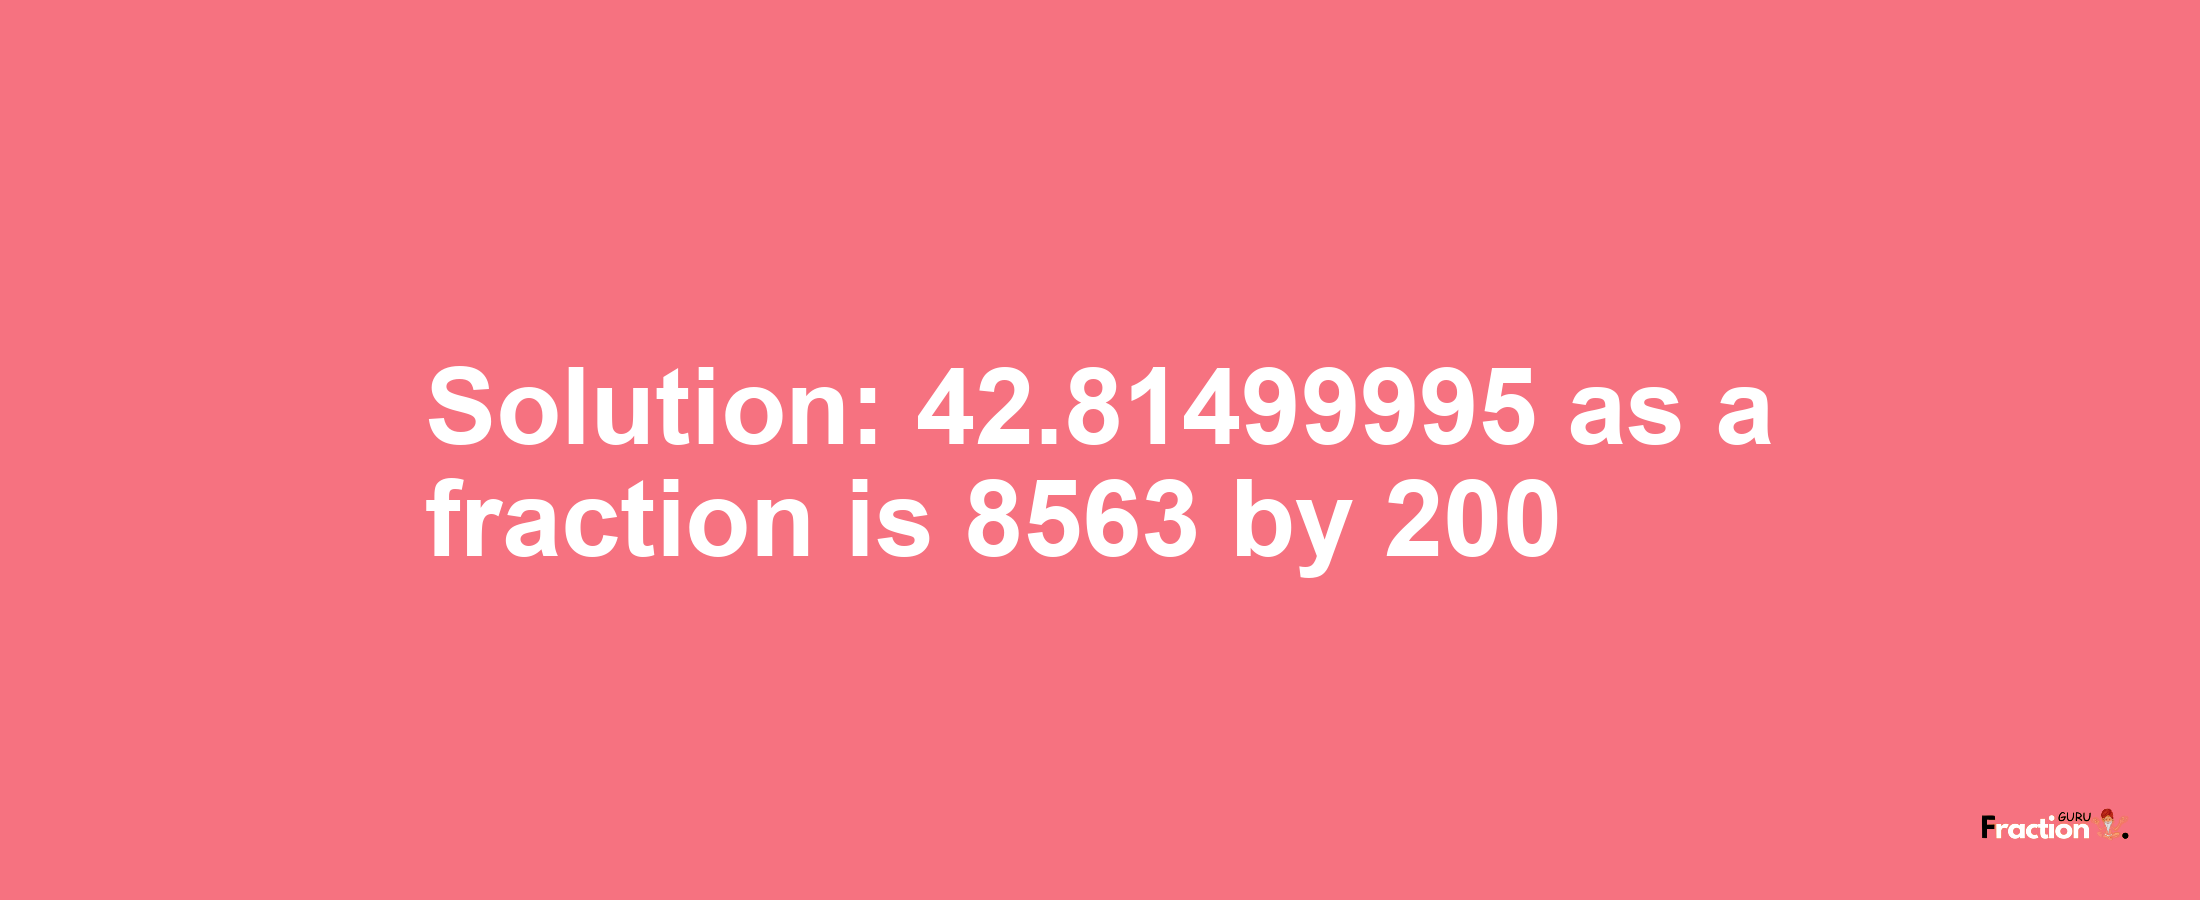 Solution:42.81499995 as a fraction is 8563/200